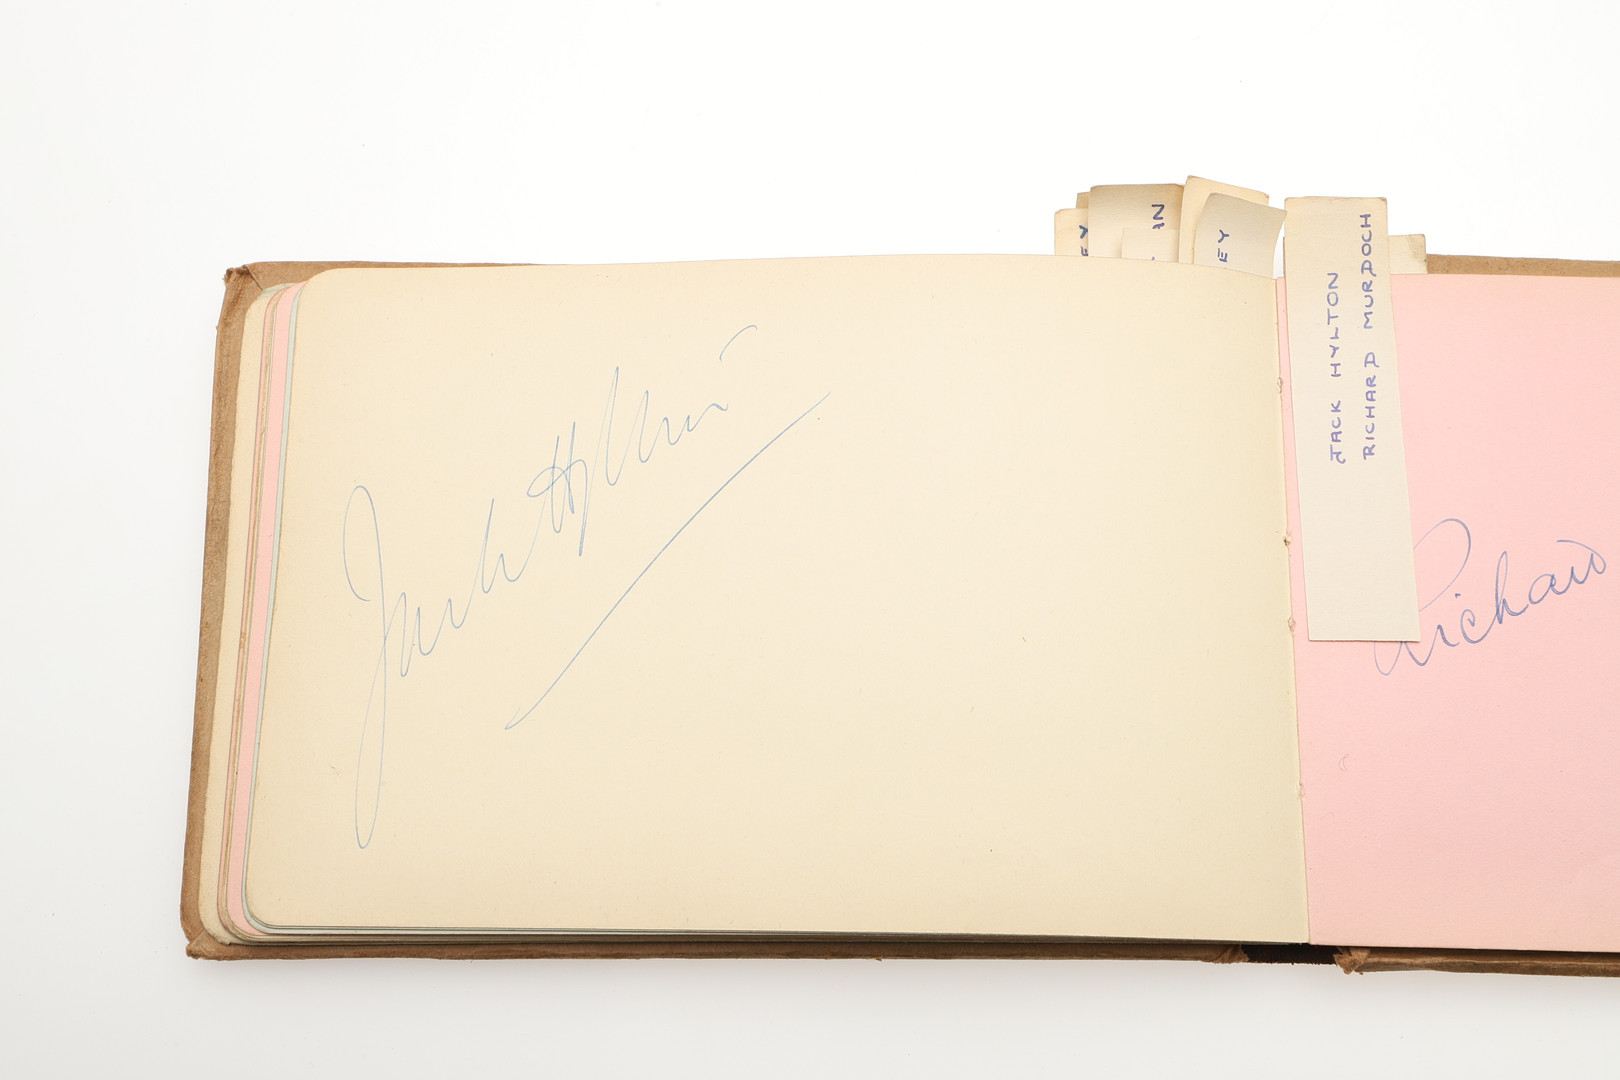 LARGE AUTOGRAPH COLLECTION - WINSTON CHURCHILL & OTHER AUTOGRAPHS. - Image 29 of 63